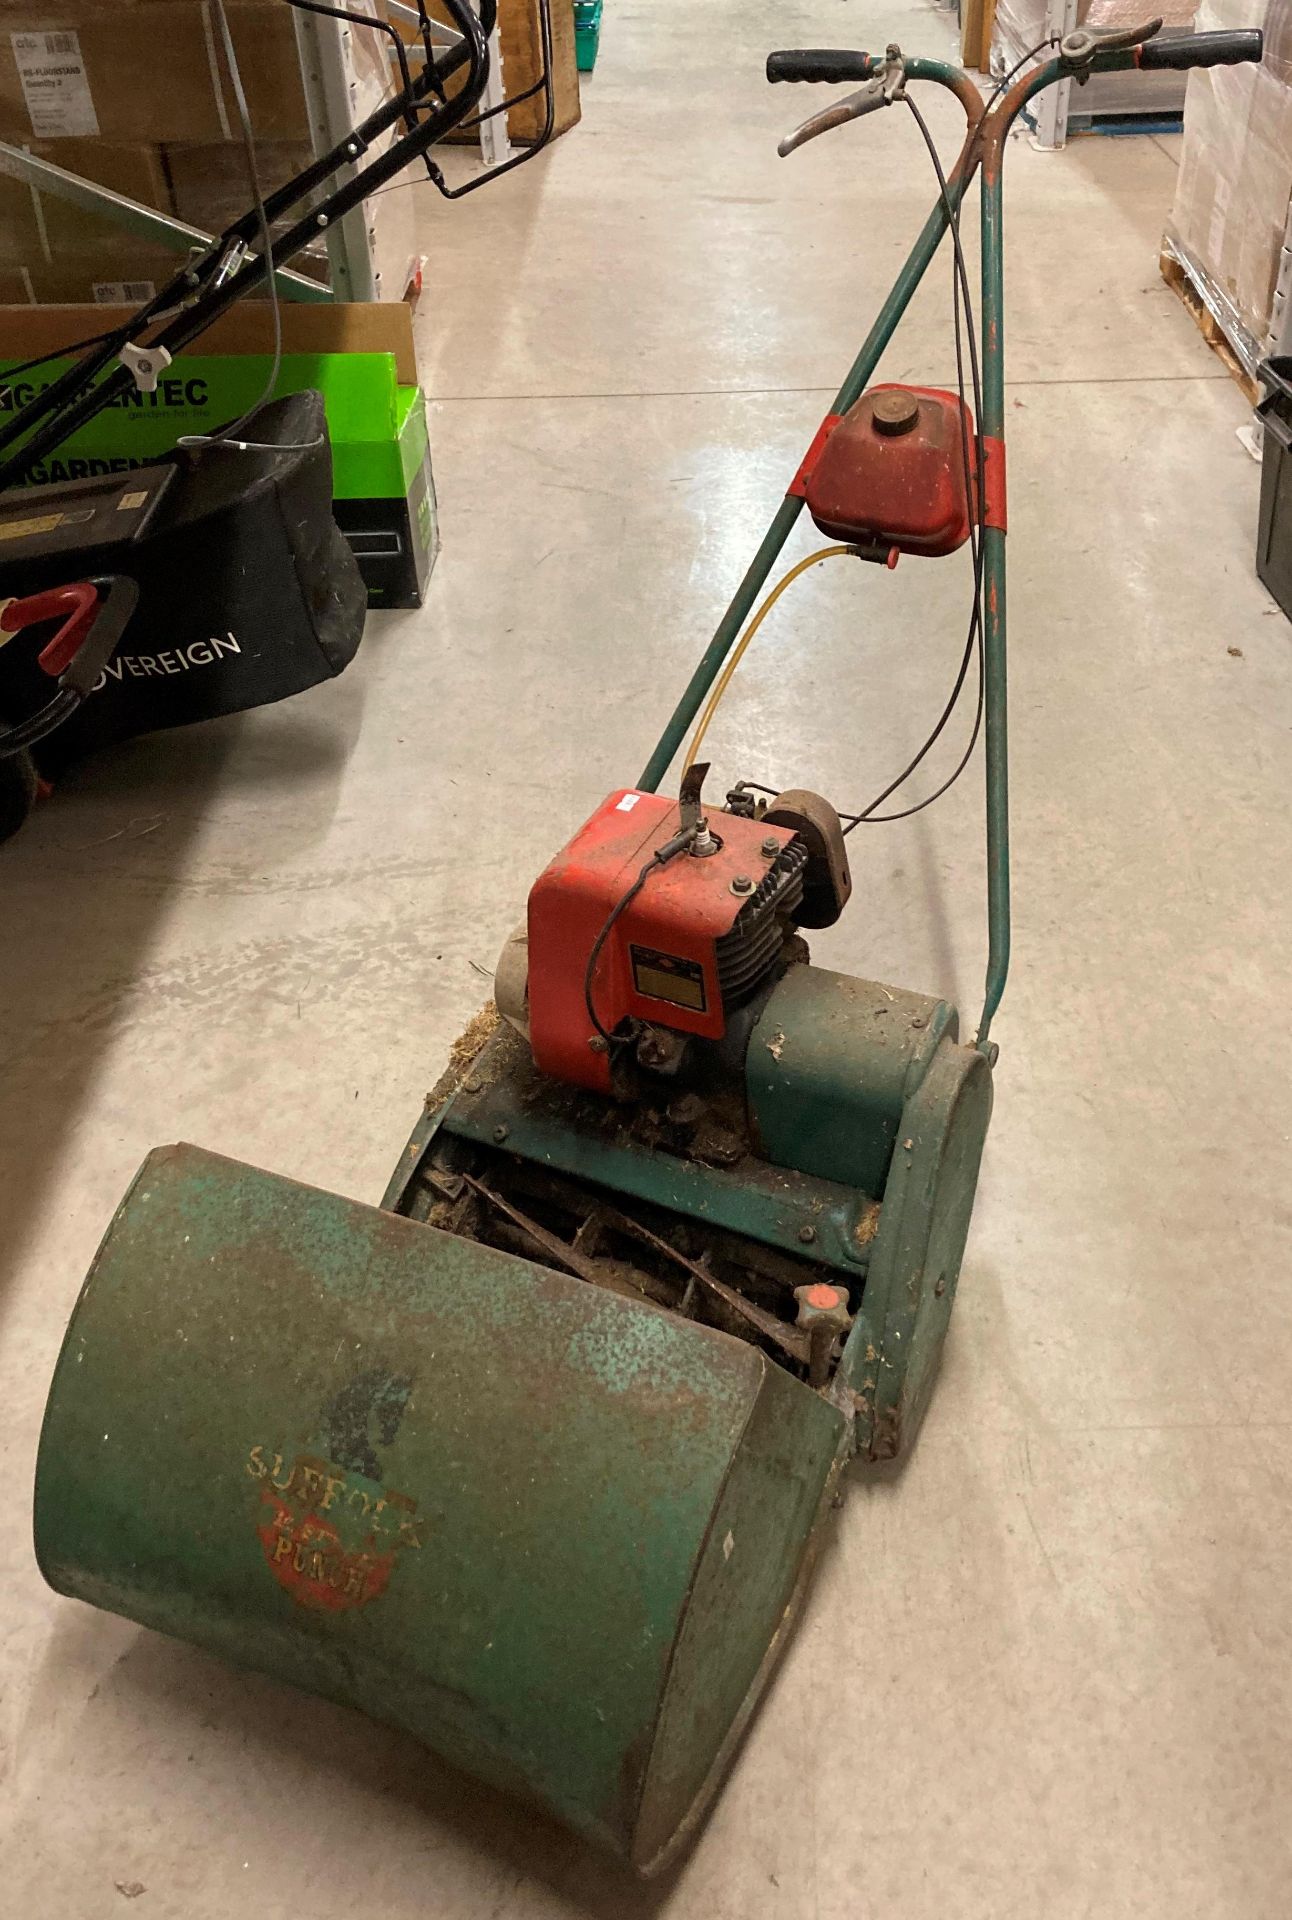 A Suffolk Lawnmower Ltd model 25A petrol cylinder lawnmower complete with collection bucket - not